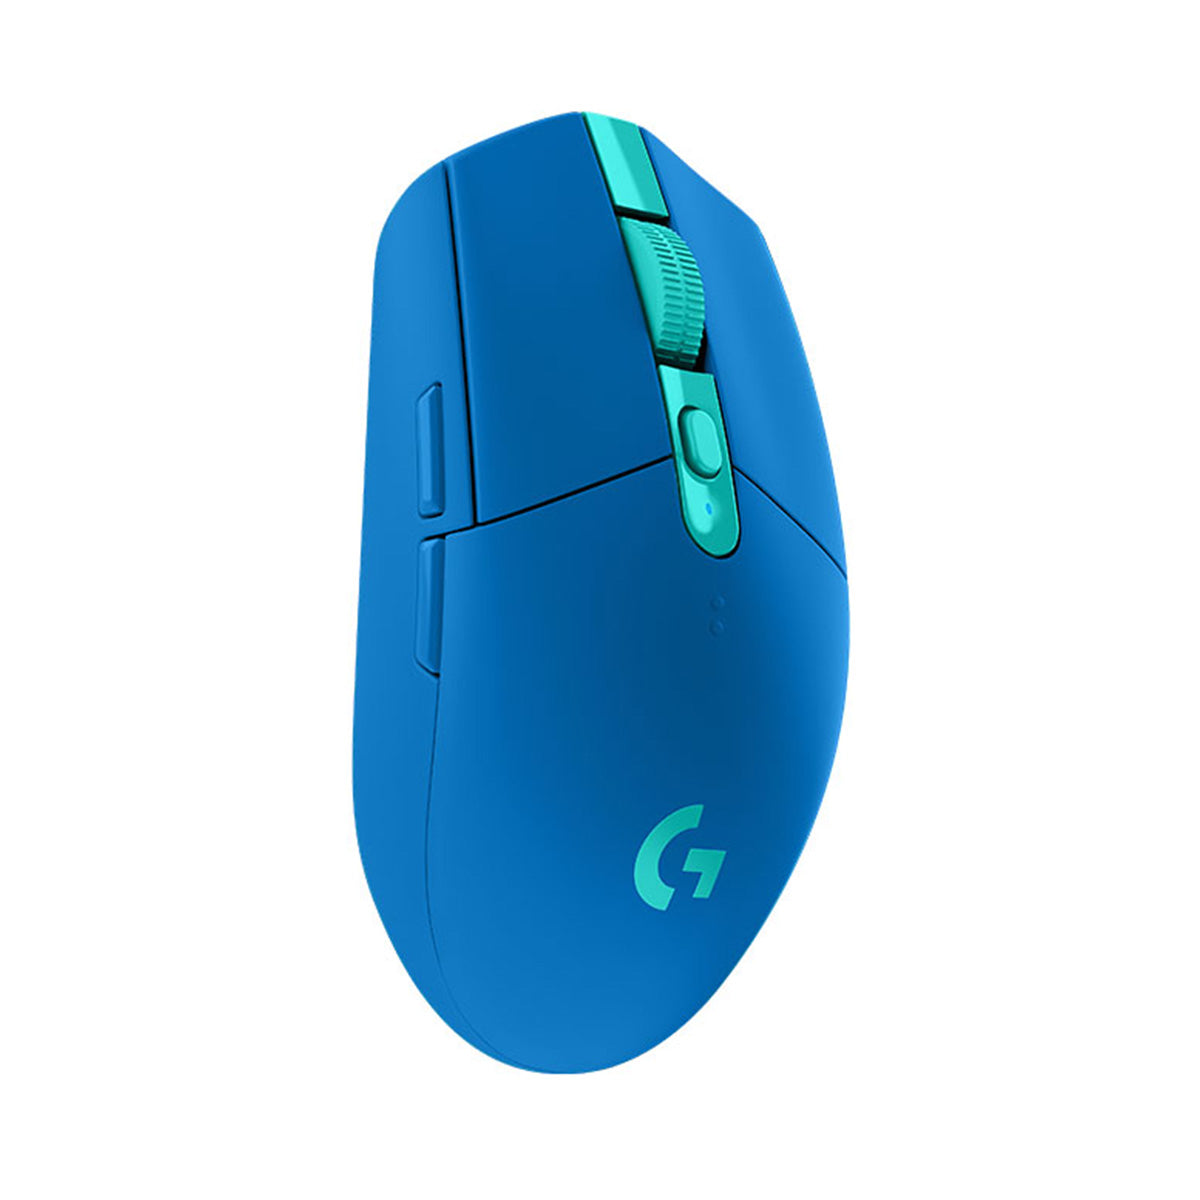 Logitech G305 LIGHTSPEED Wireless Gaming Mouse - Blue – Ghostly Engines